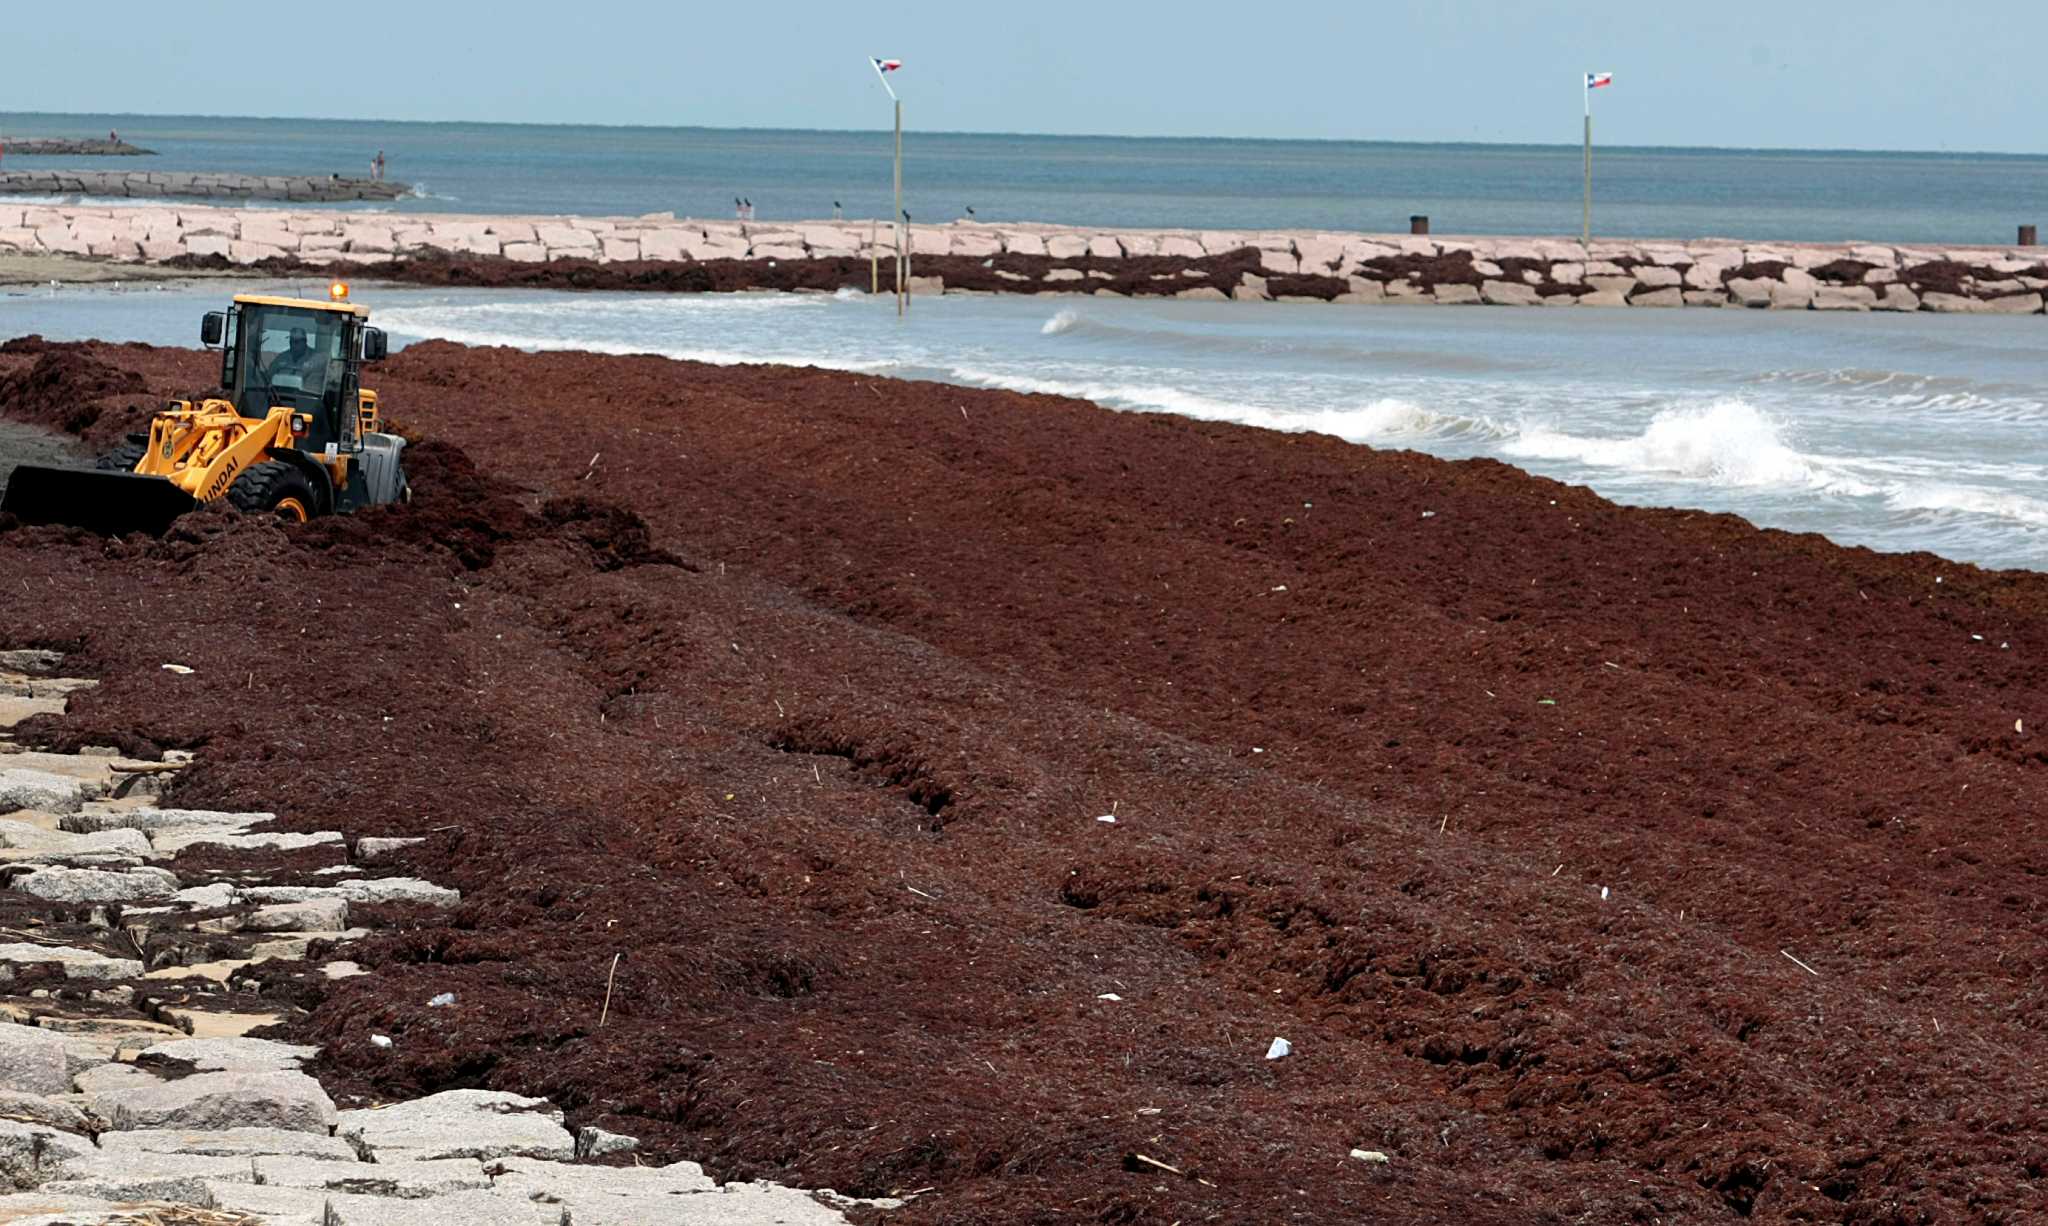 Scientists gather in Galveston to tackle 'Summer of Seaweed' mystery